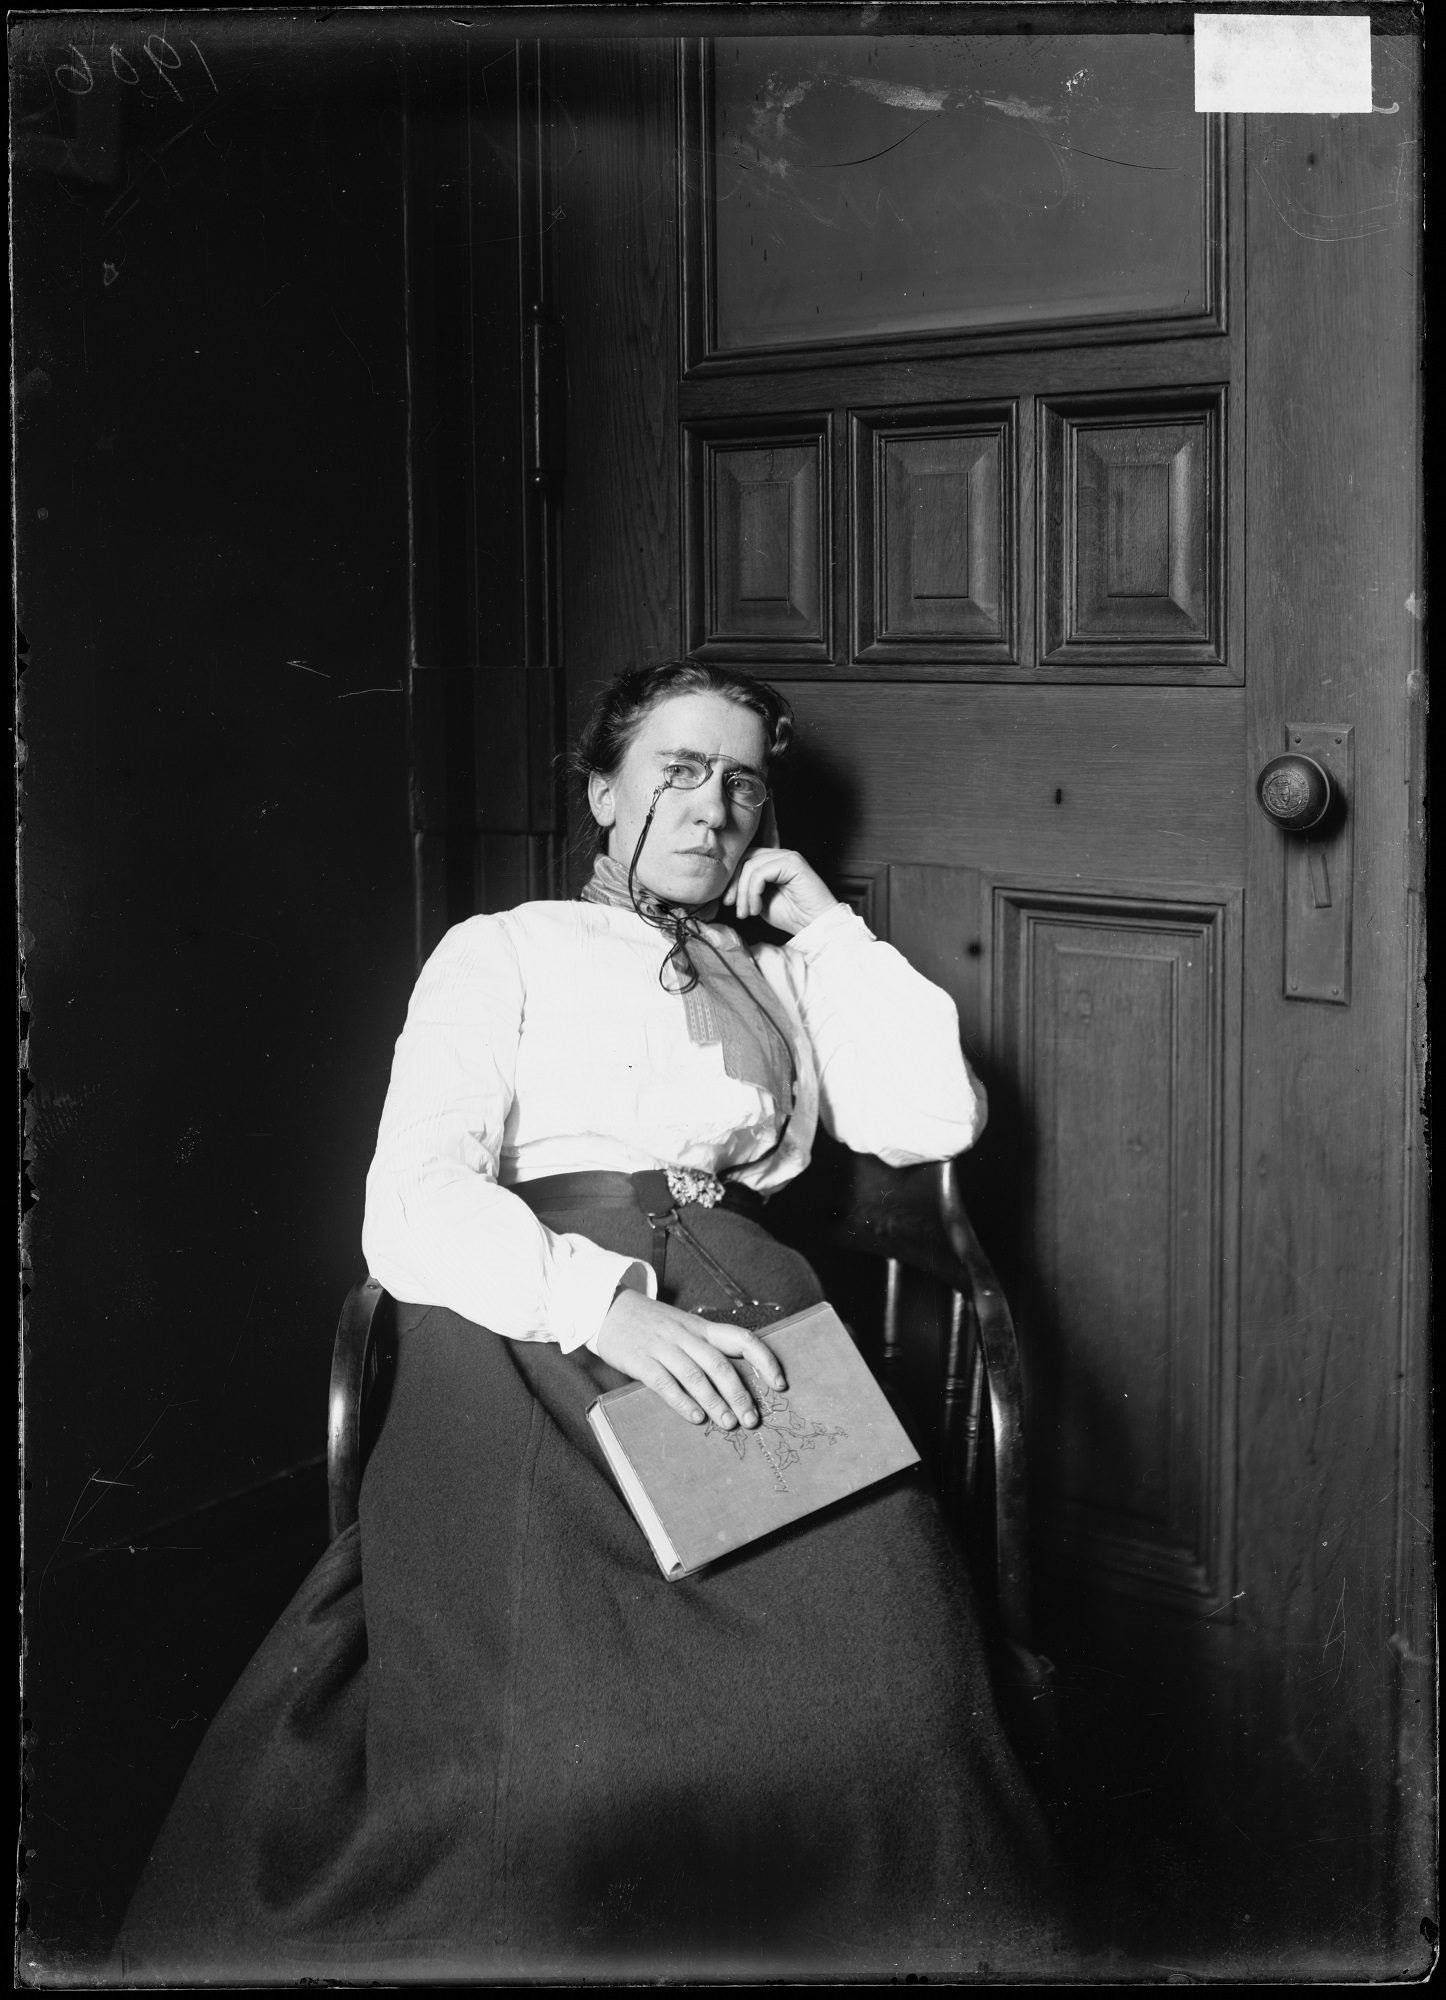 A black & white three-quarter length portrait of a woman sitting in a chair and facing the camera, in front of a wooden door.